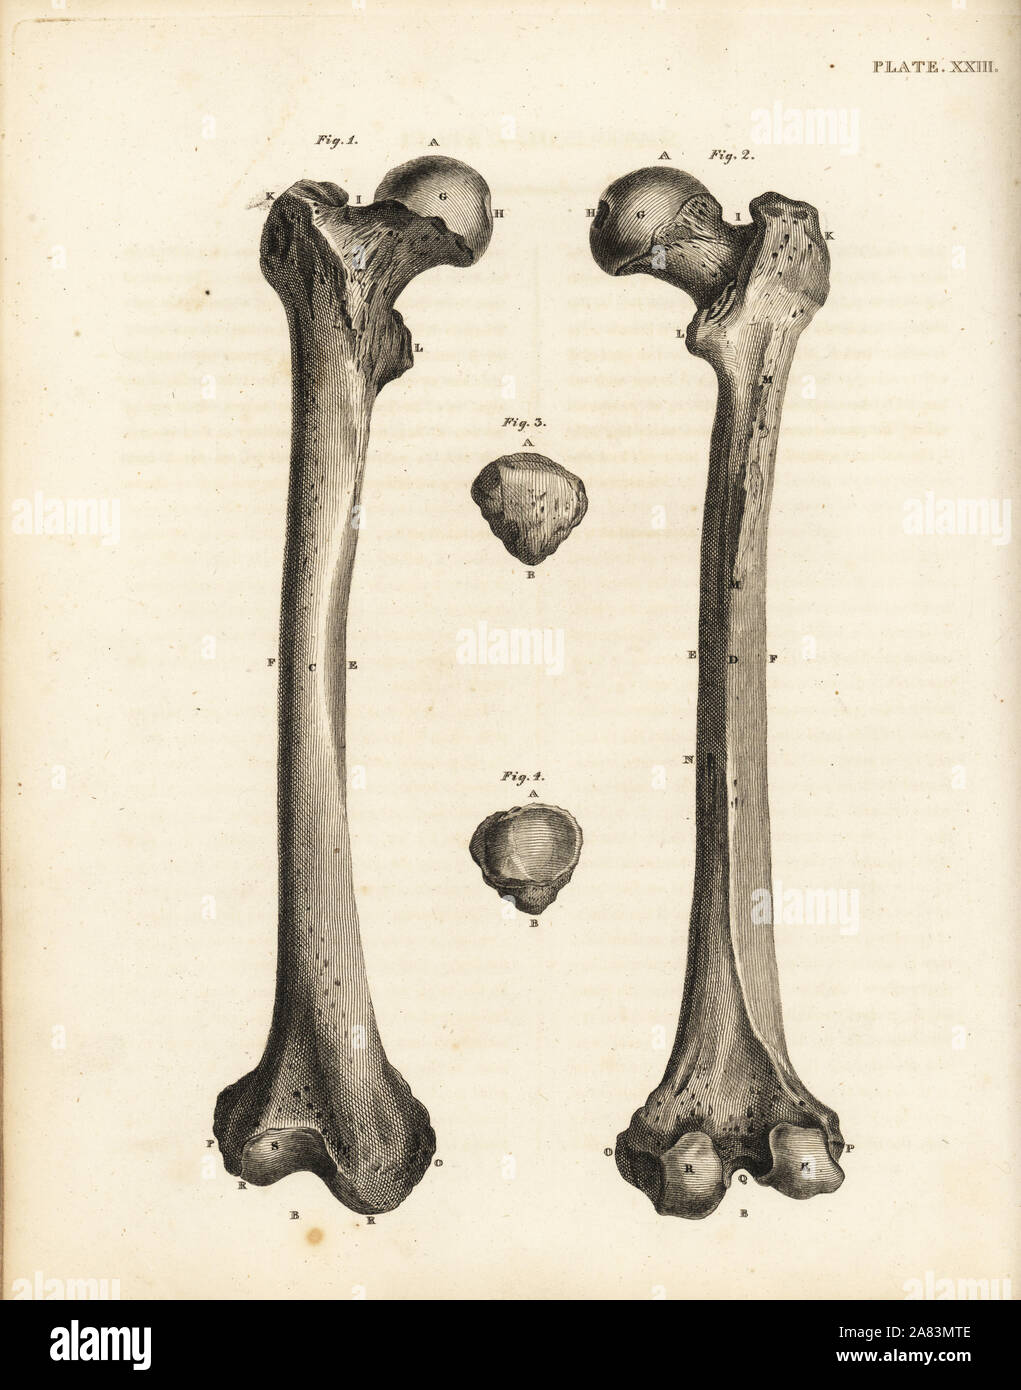 Views of the femur and rotula bones in the human leg. Copperplate engraving by Edward Mitchell after an anatomical illustration by Jean-Joseph Sue from John Barclay's A Series of Engravings of the Human Skeleton, MacLachlan and Stewart, Edinburgh, 1824. Stock Photo